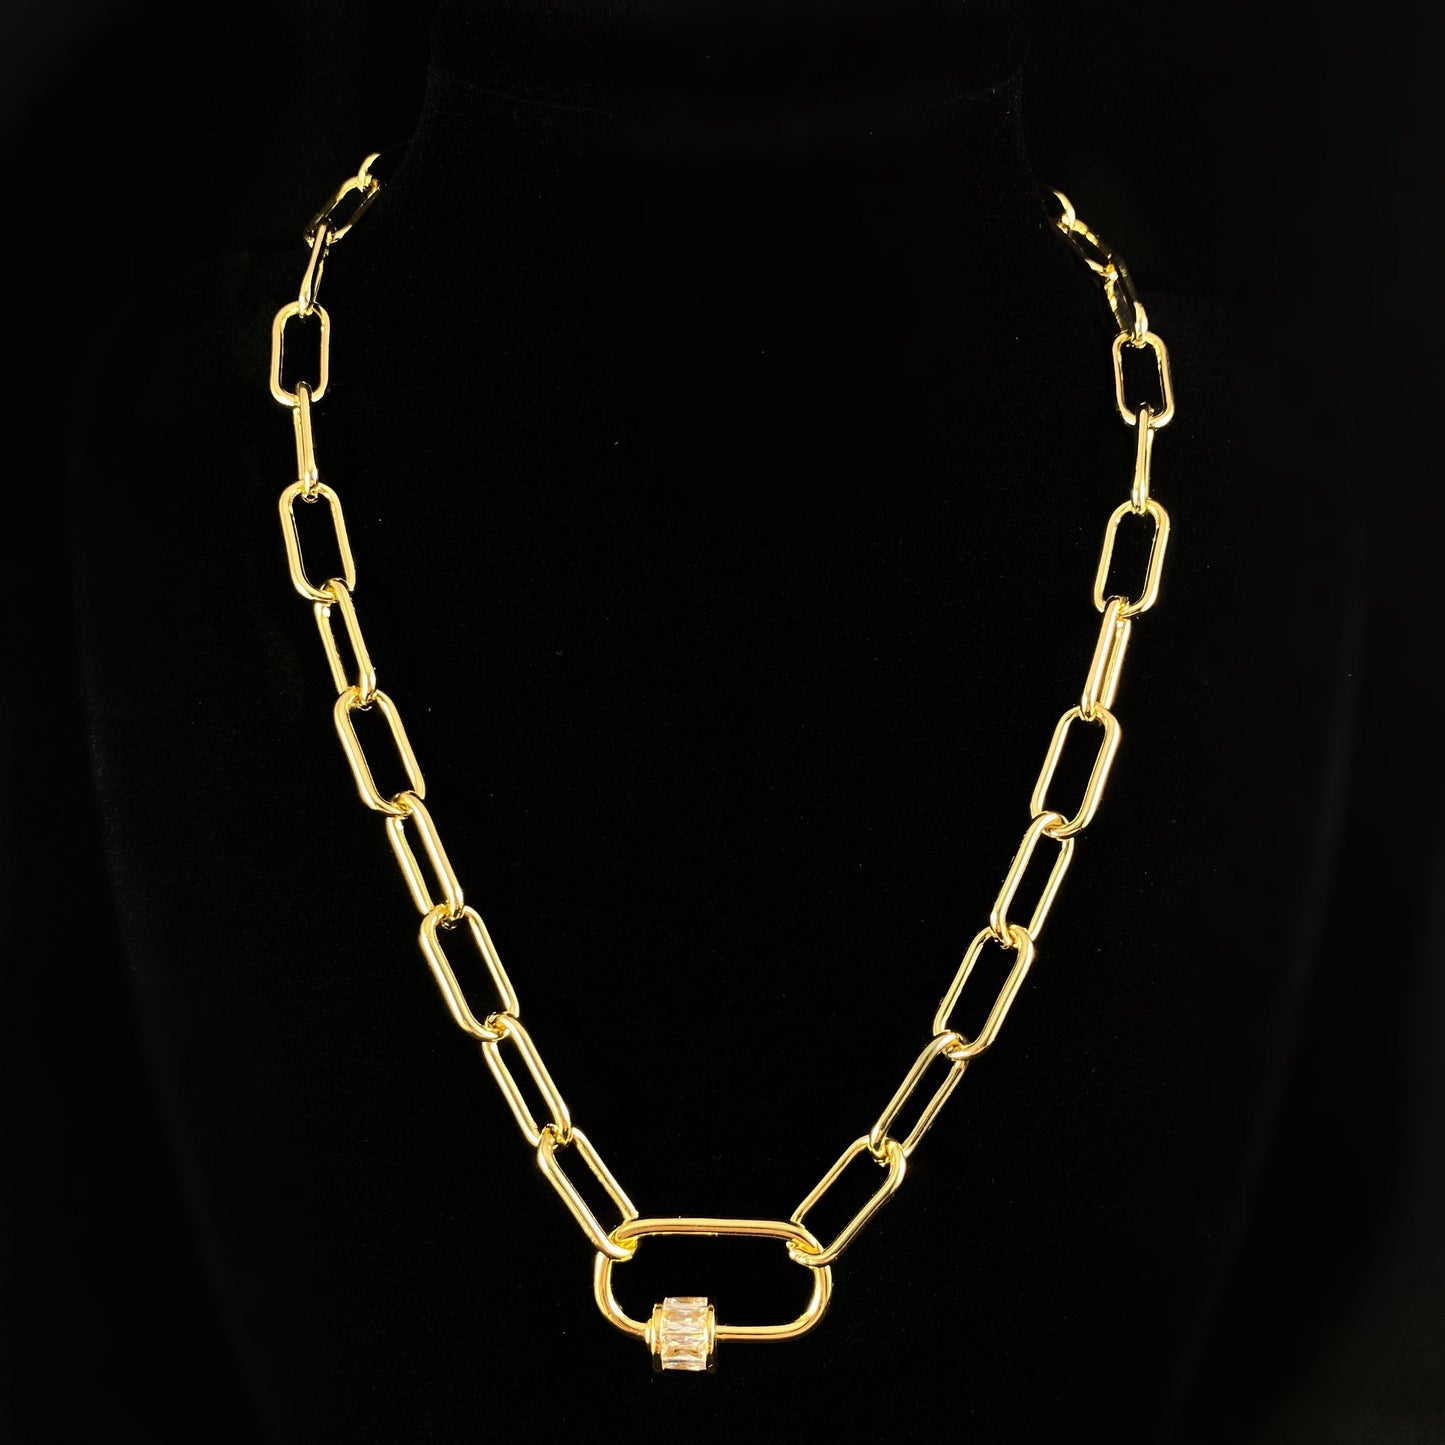 1920s Art Deco Gold Chain Necklace with CZ Crystal Focal Clasp - Locker Link